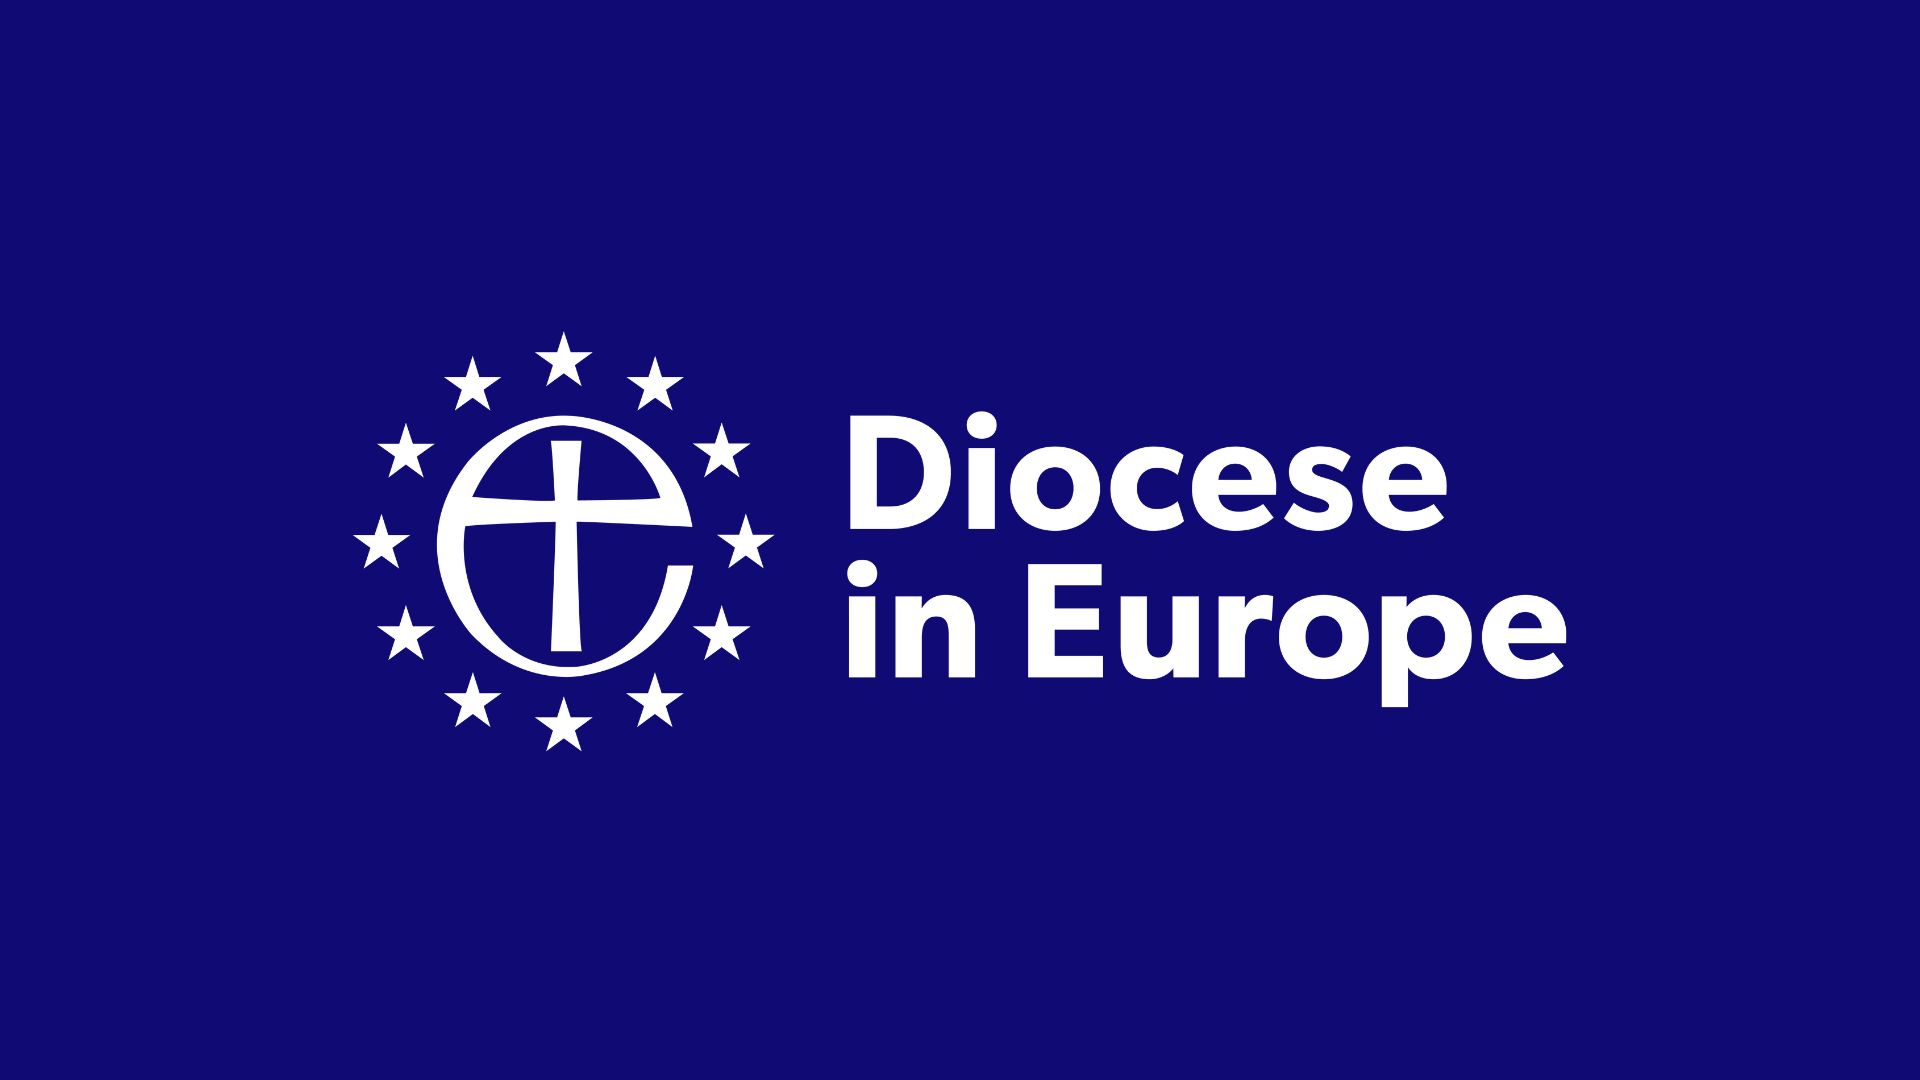 Blue background, white Diocese in Europe logo